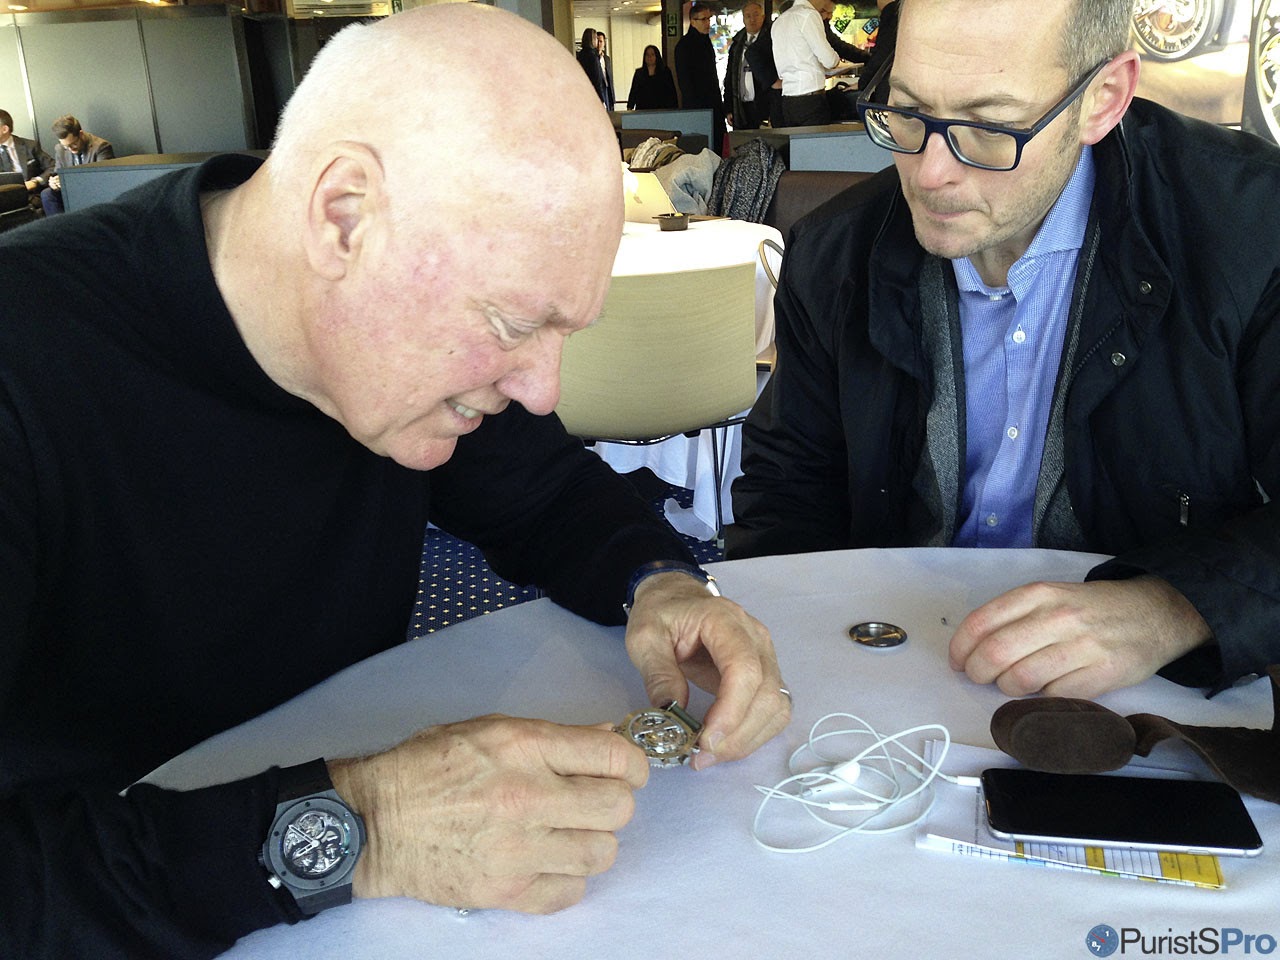 jean claude biver watch collection